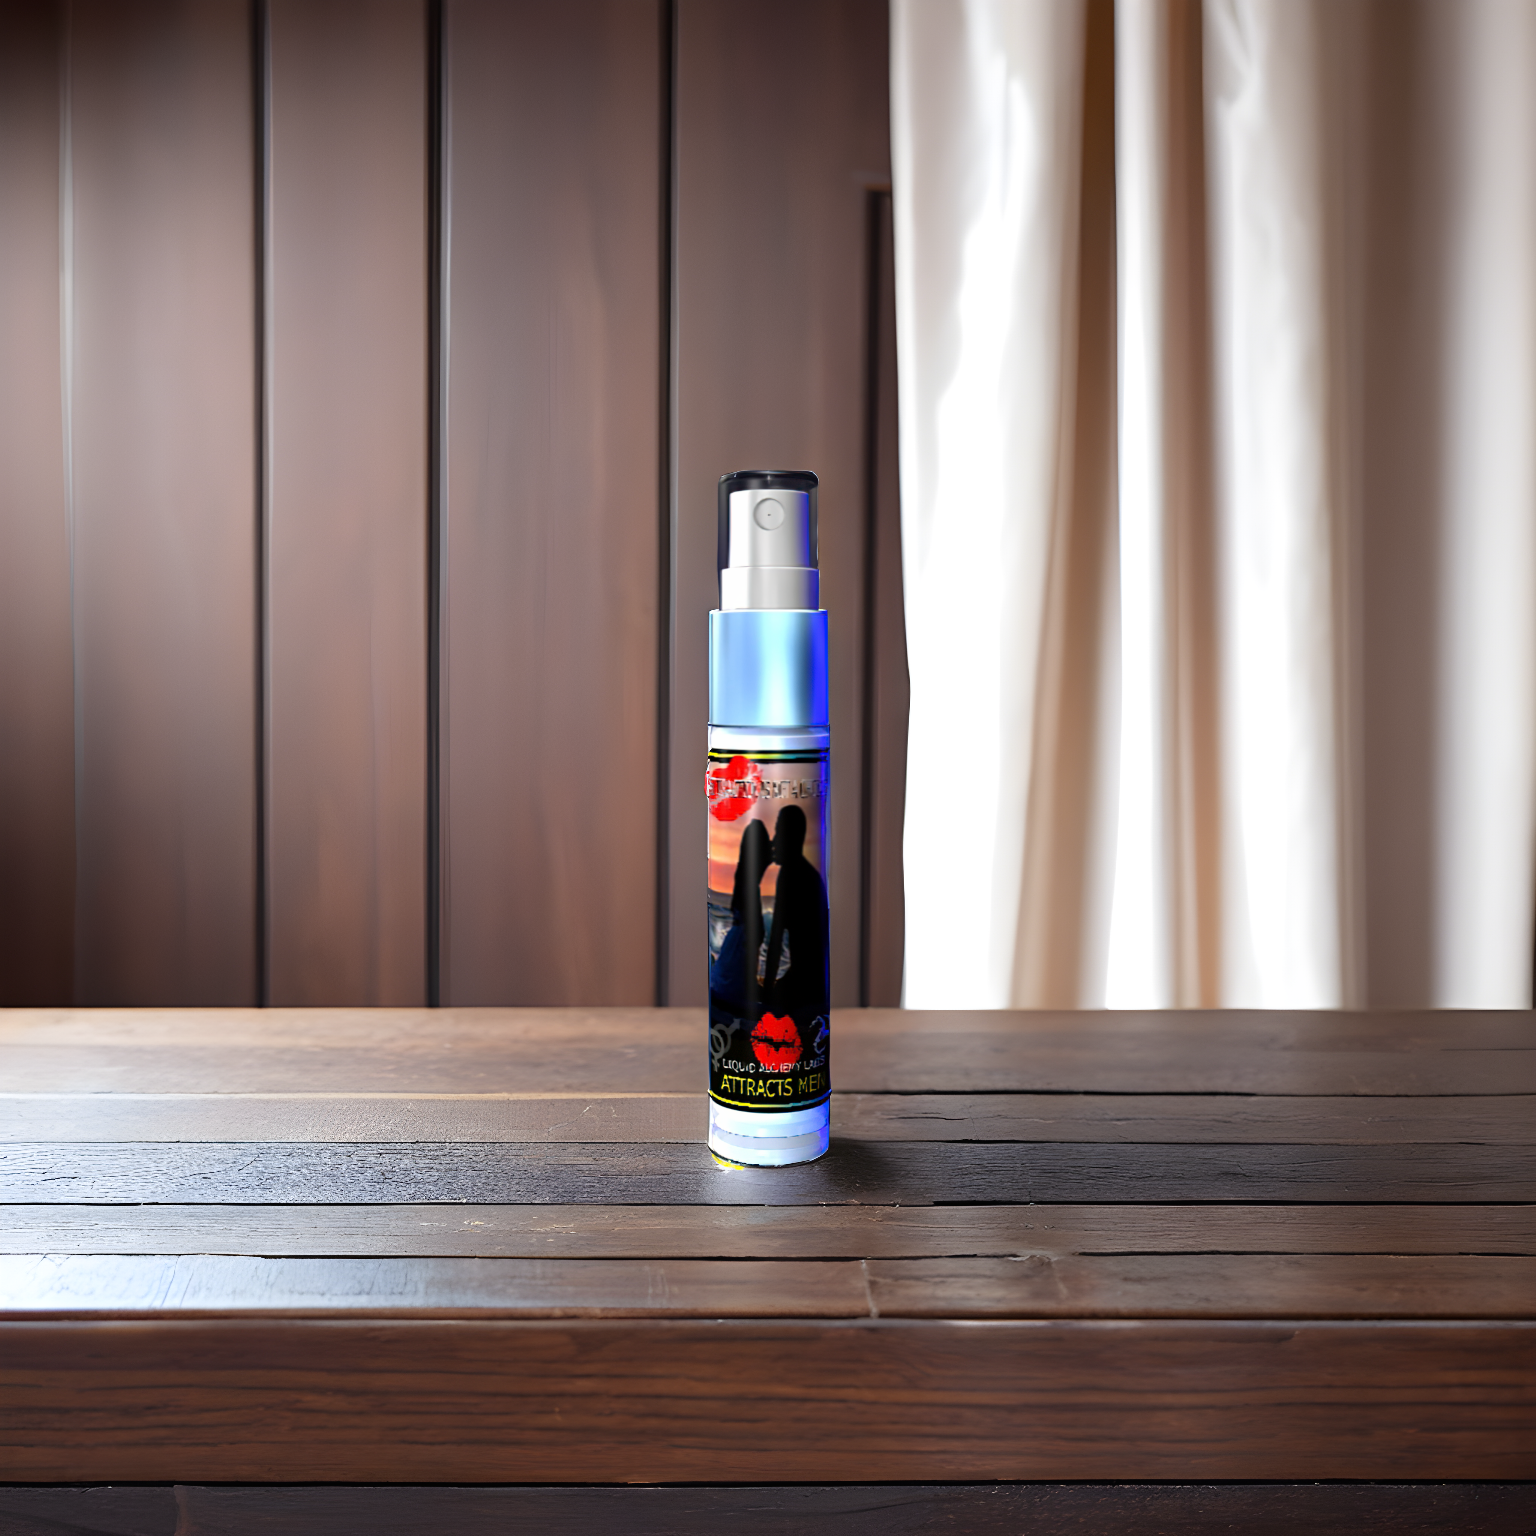 MAUI KISS™ Spray Perfume for Women by Liquid Alchemy Labs on a Wooden Table, Perfect Tropical Scent for Attracting Men, Royal Pheromones Line, in Front of Curtain Background.